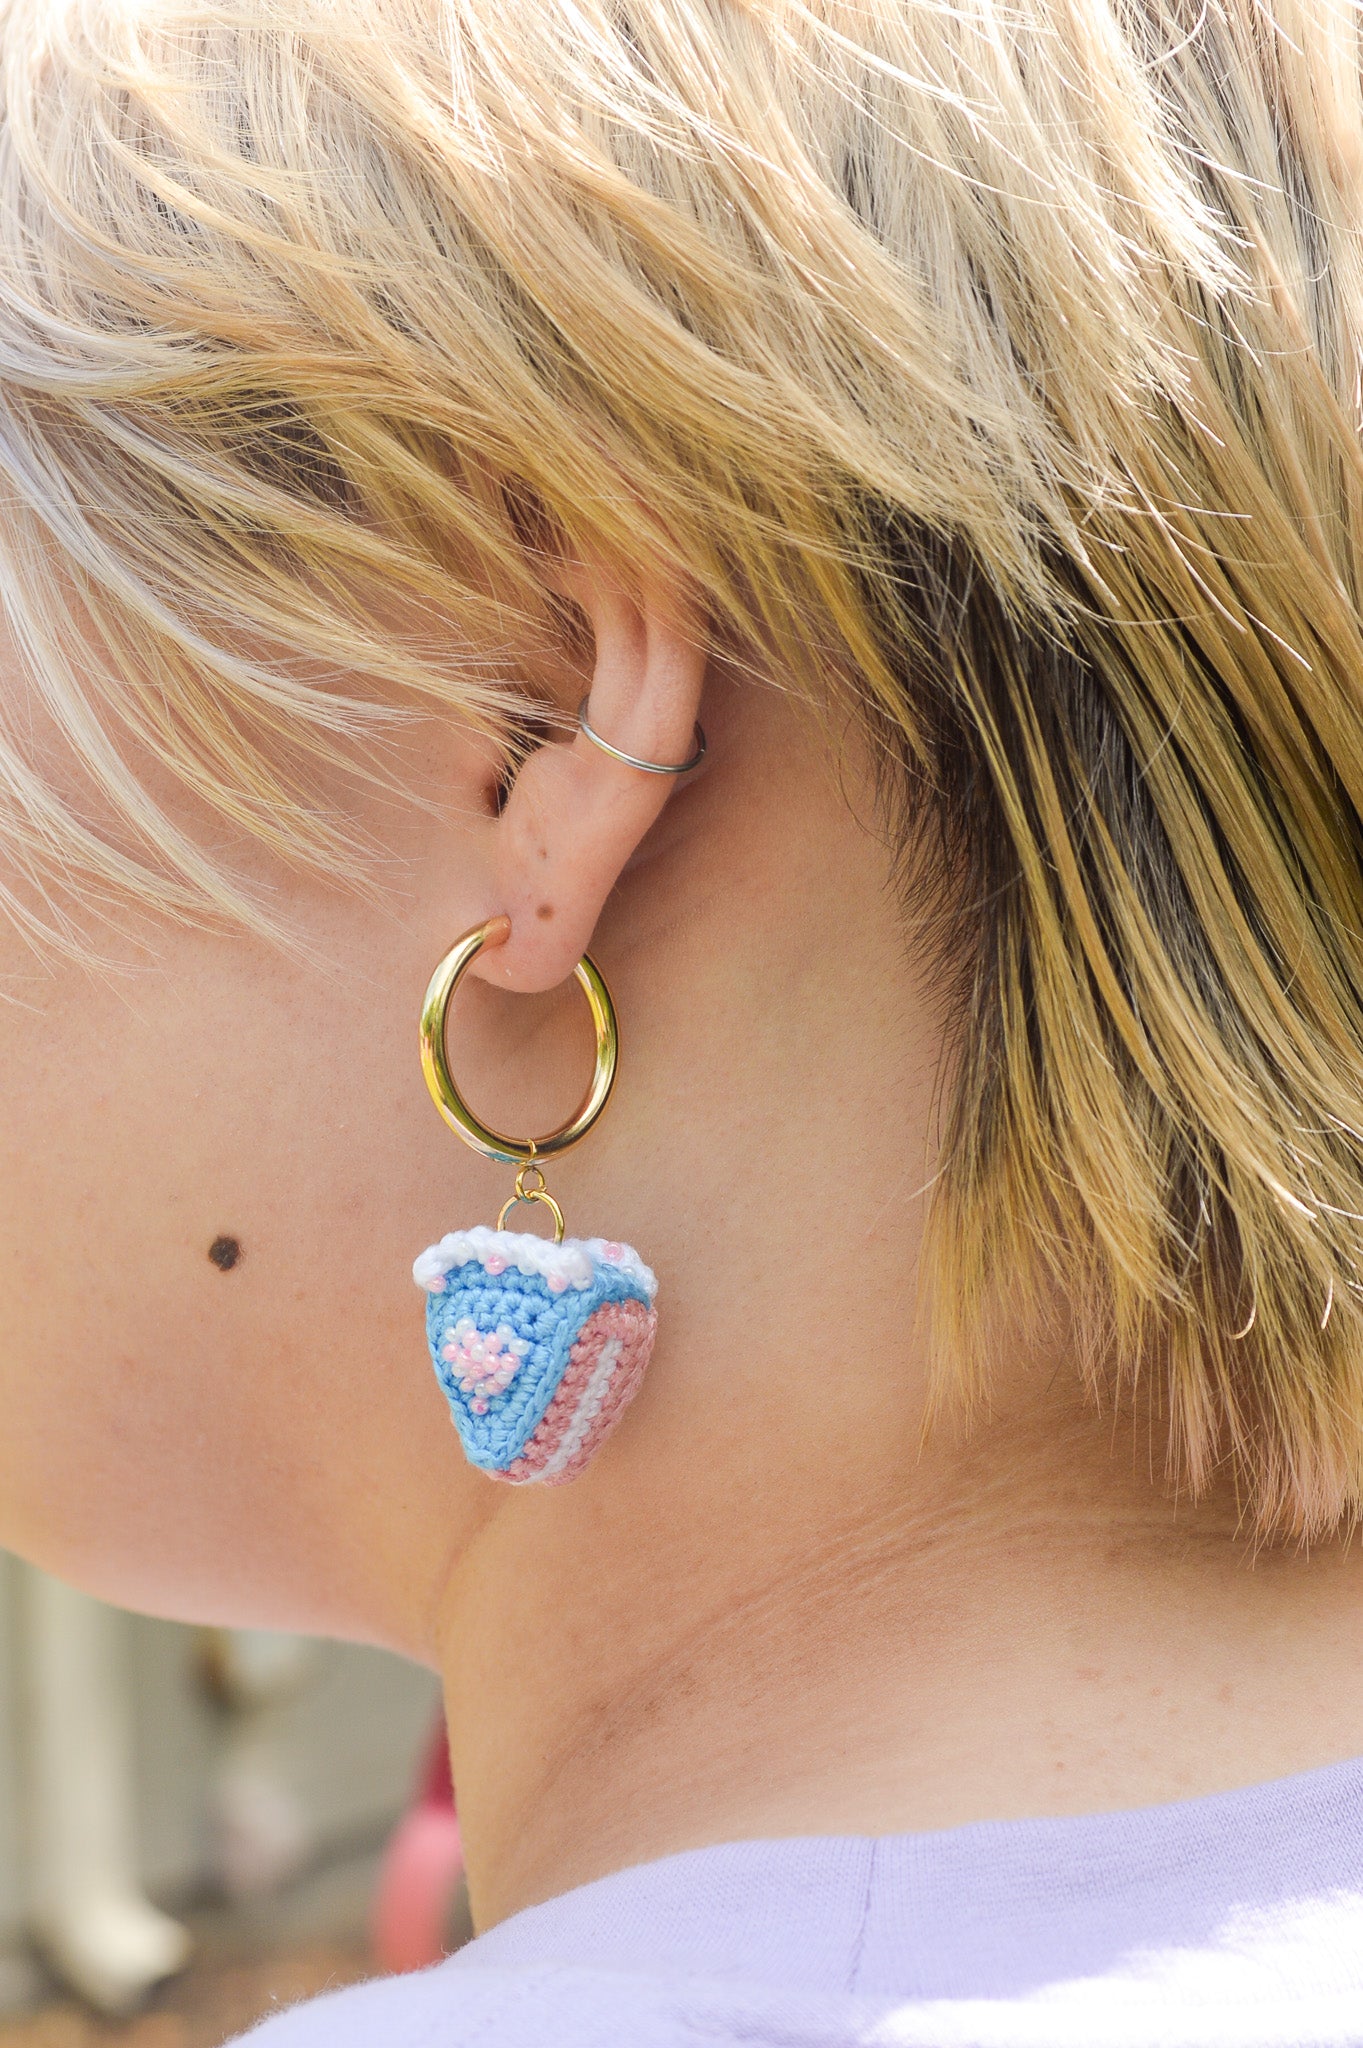 Slice of Cotton Candy Cake Earrings